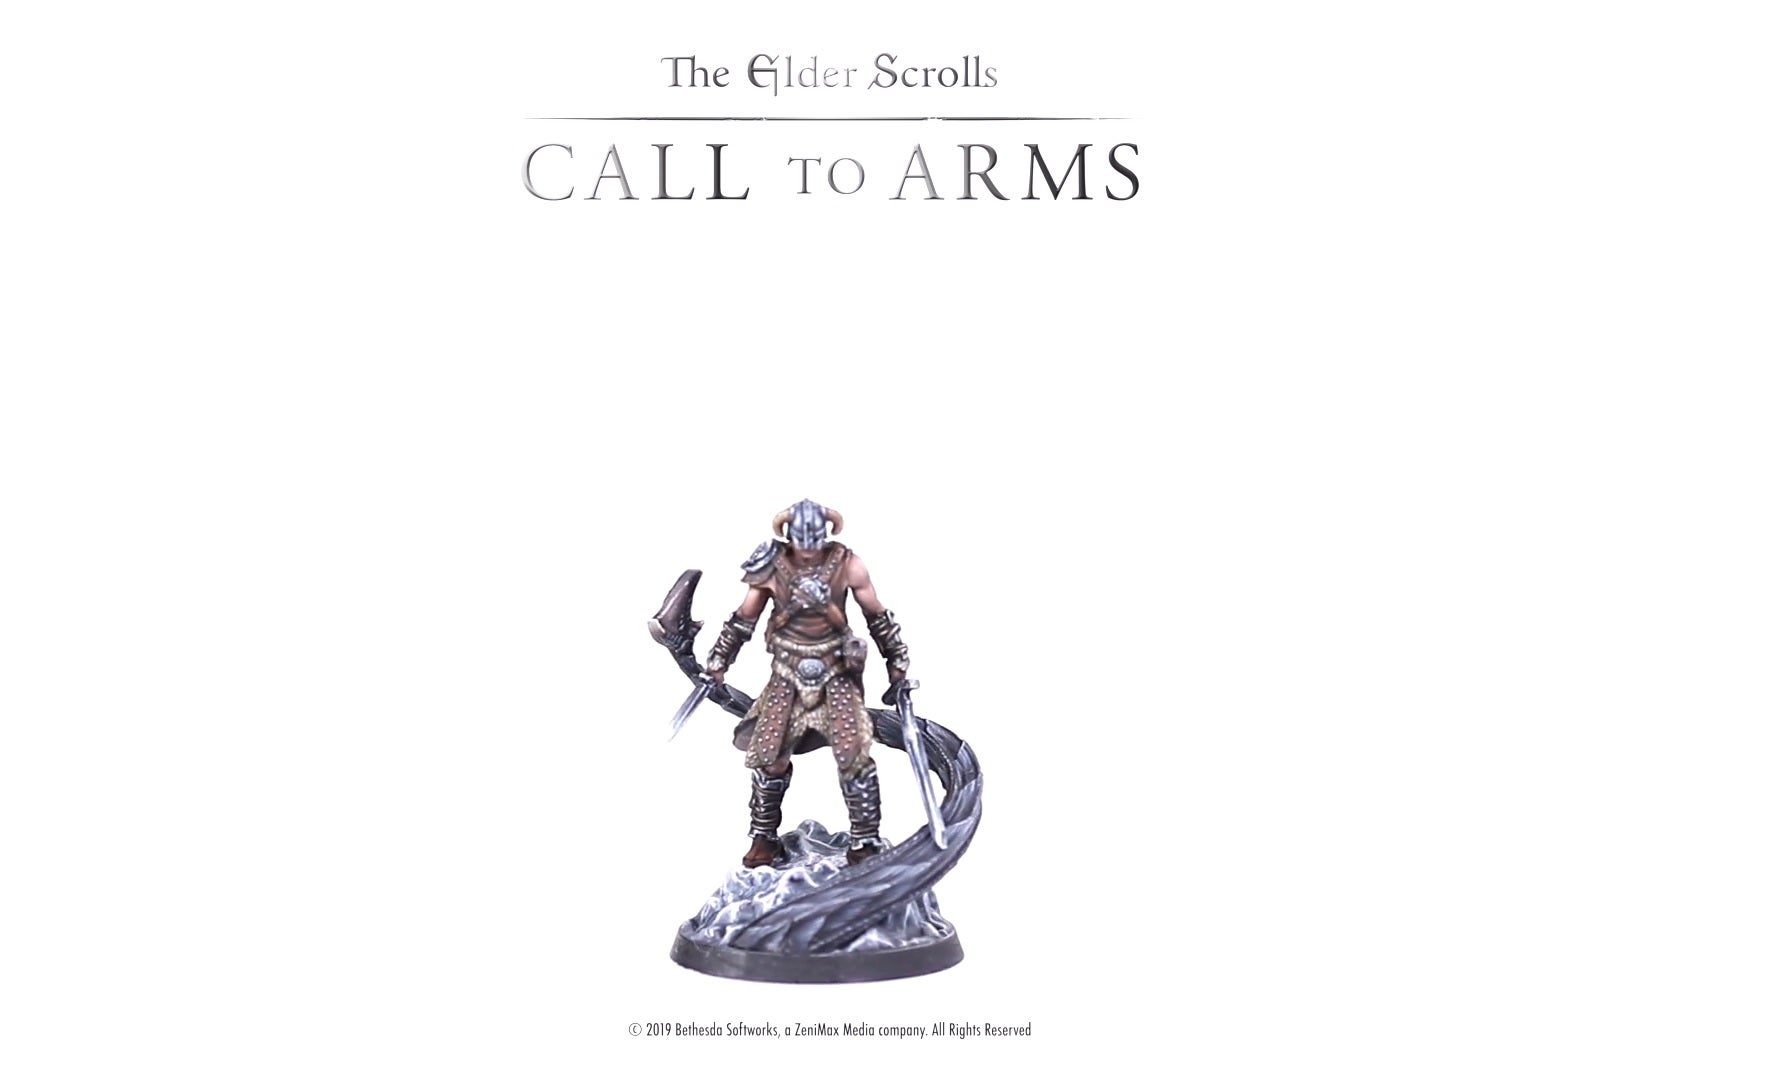 Image for The Elder Scrolls: Call to Arms is the first ever tabletop game set in Bethesda's fantasy world